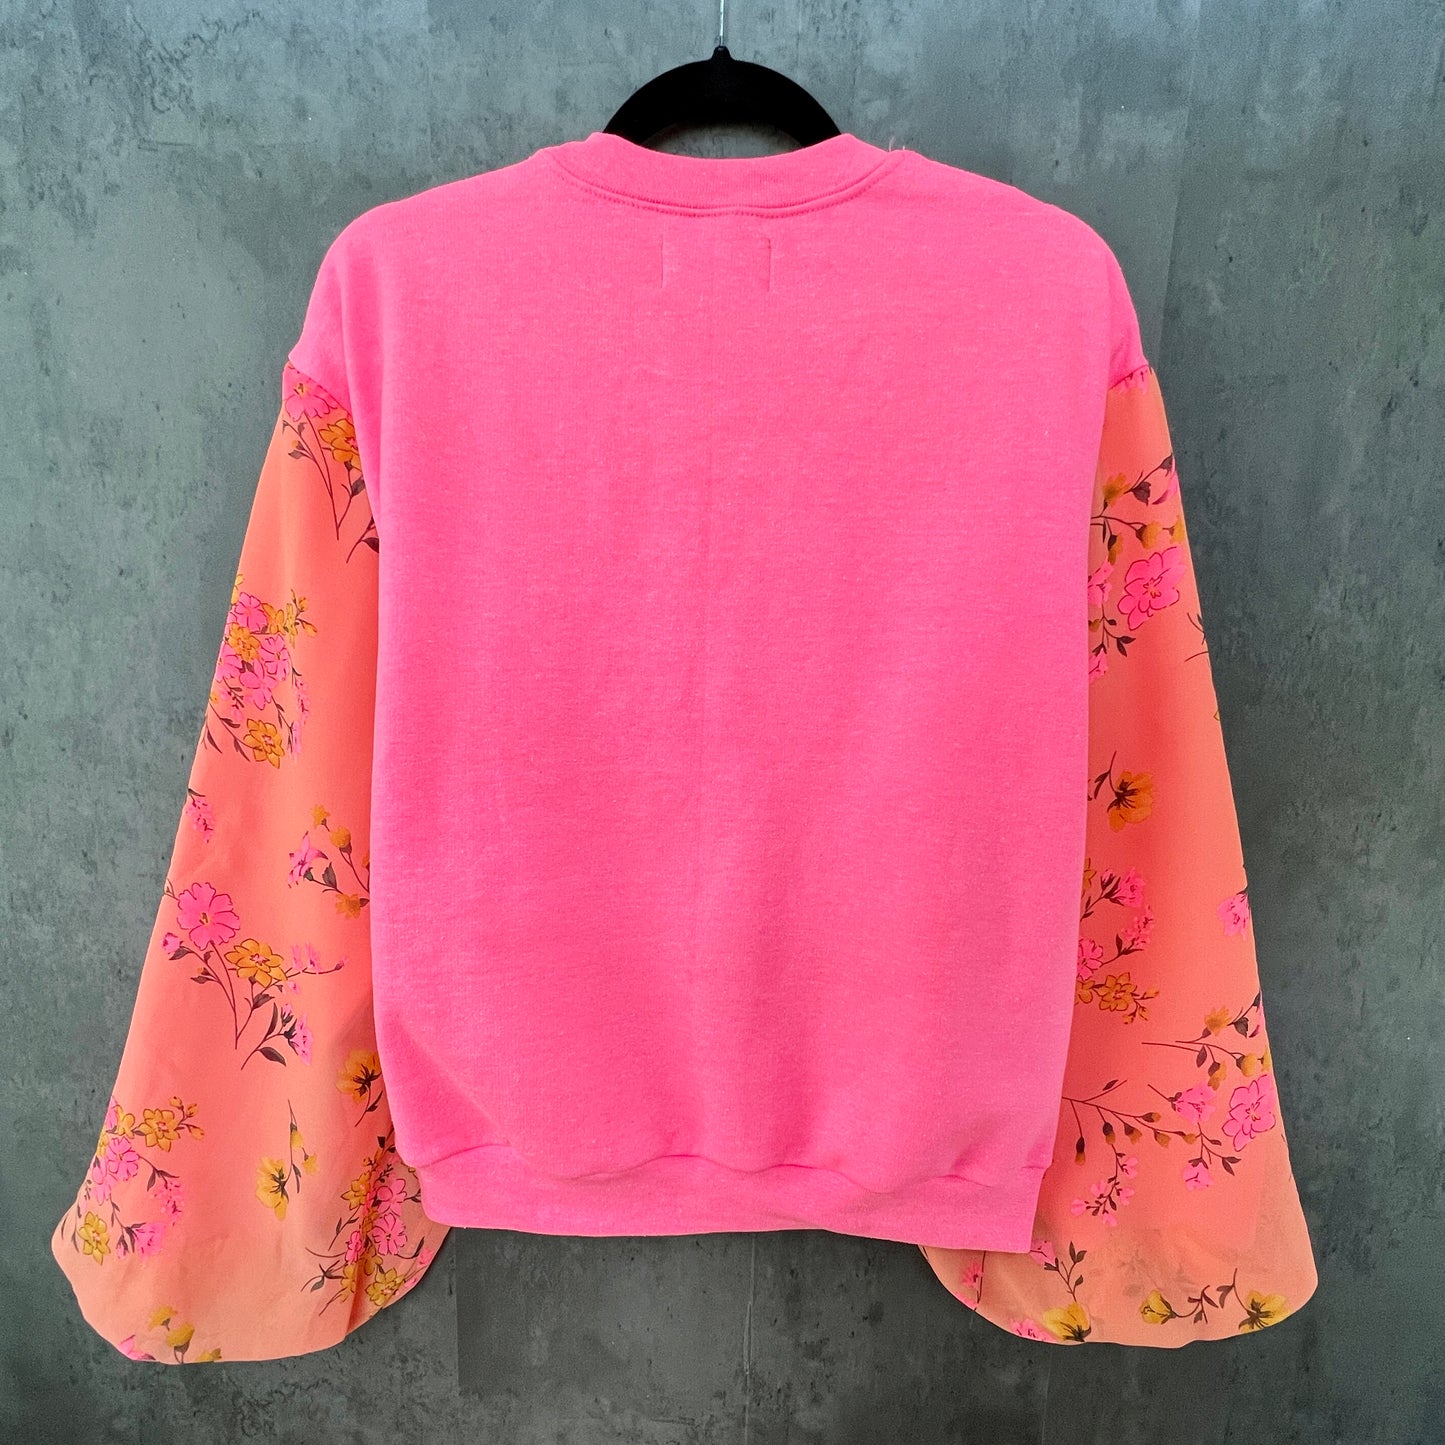 Back view of neon hot pink sweatshirt on hanger in front of cement gray background. Sweatshirt has puff sleeves with bright coral pink and marigold colorful floral.